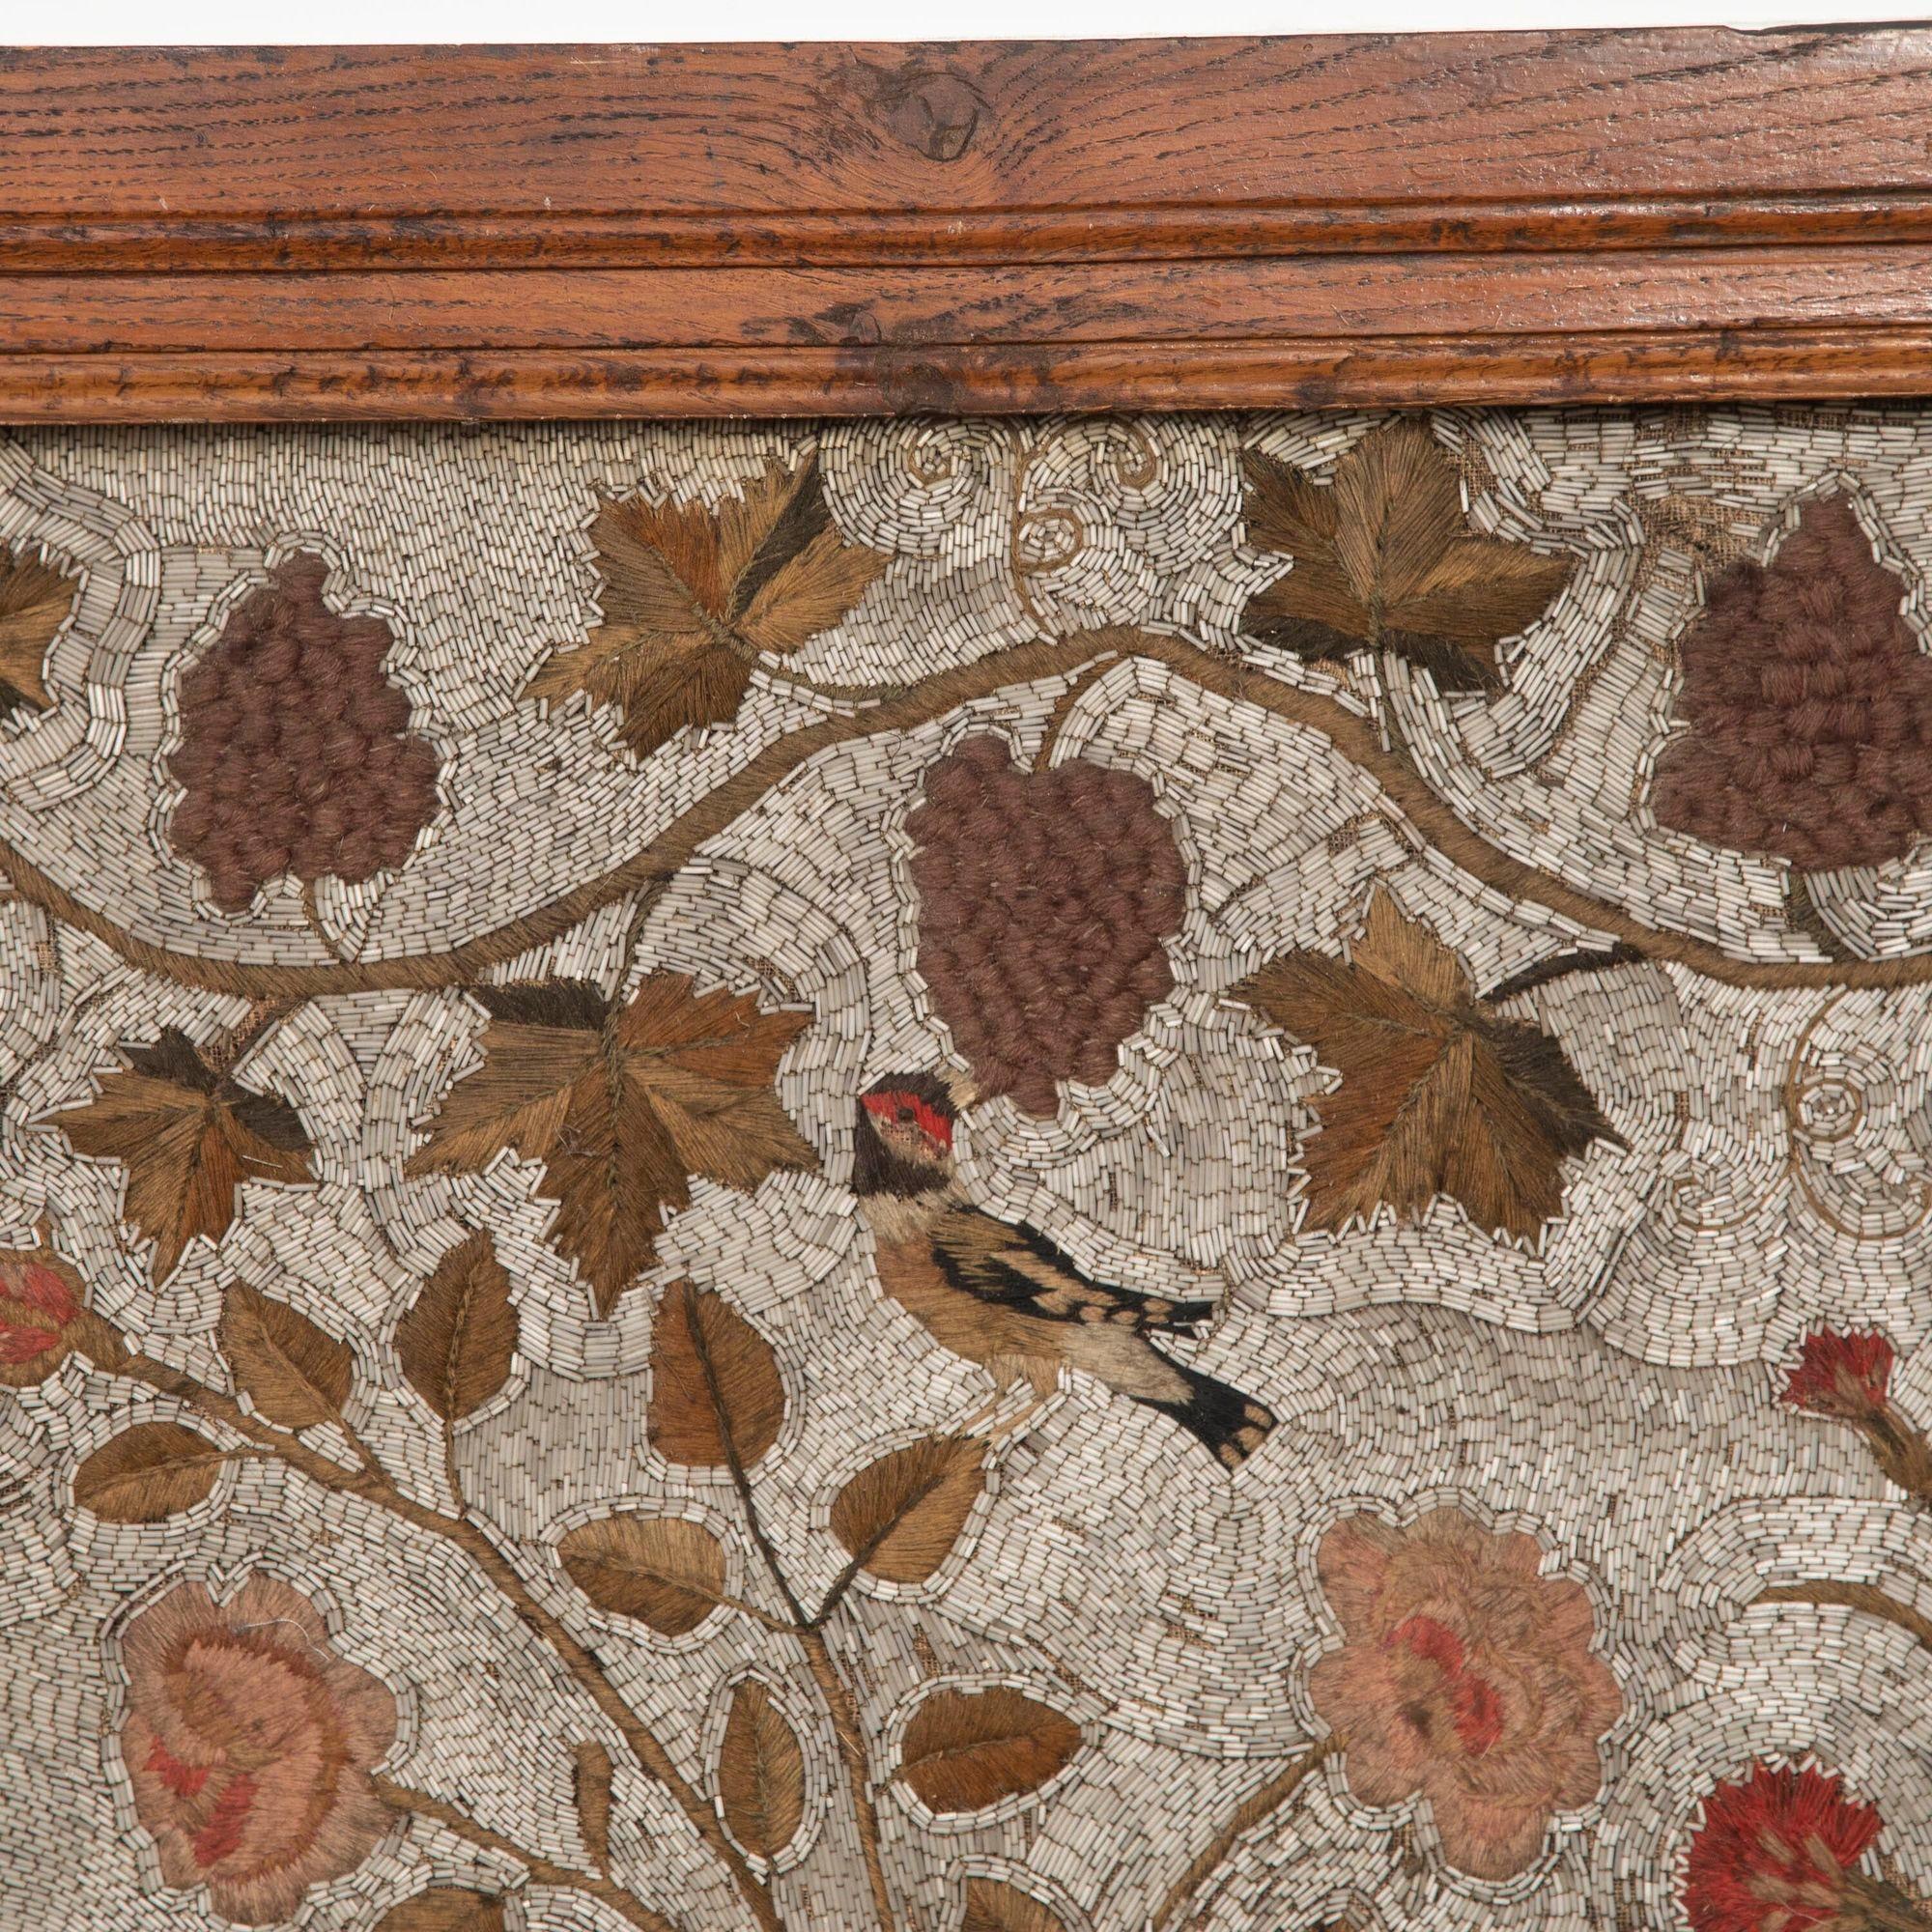 18th Century front panel of an altar. 
This panel is originally from the private chapel of an important house in Montelimar. With beautiful decorative stitched floral design with flowers and birds, surrounding a depiction of the Paschal Lamb